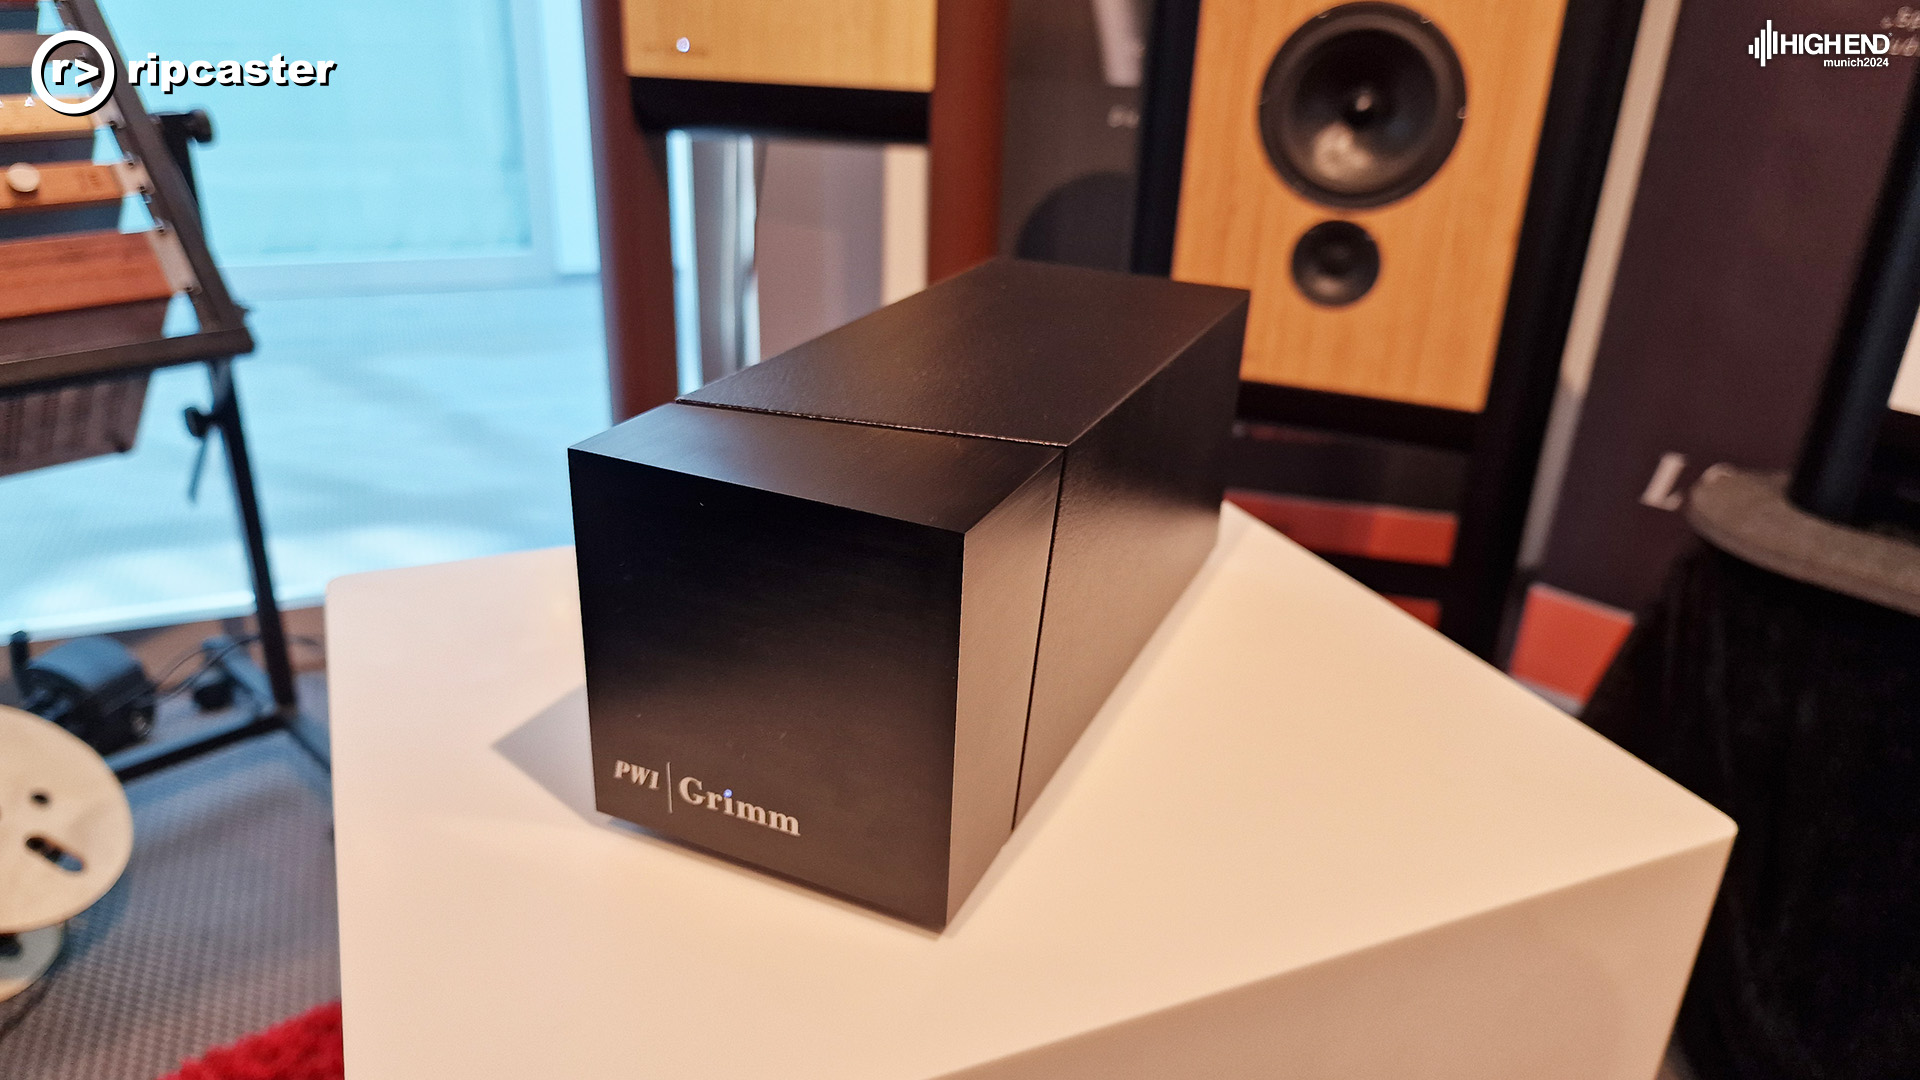 The Grimm PW1 which is a long rectangular box shape.  There are speakers in the background .  The Grimm speakers are thing rectangular shaped with legs either side of the rectangle.